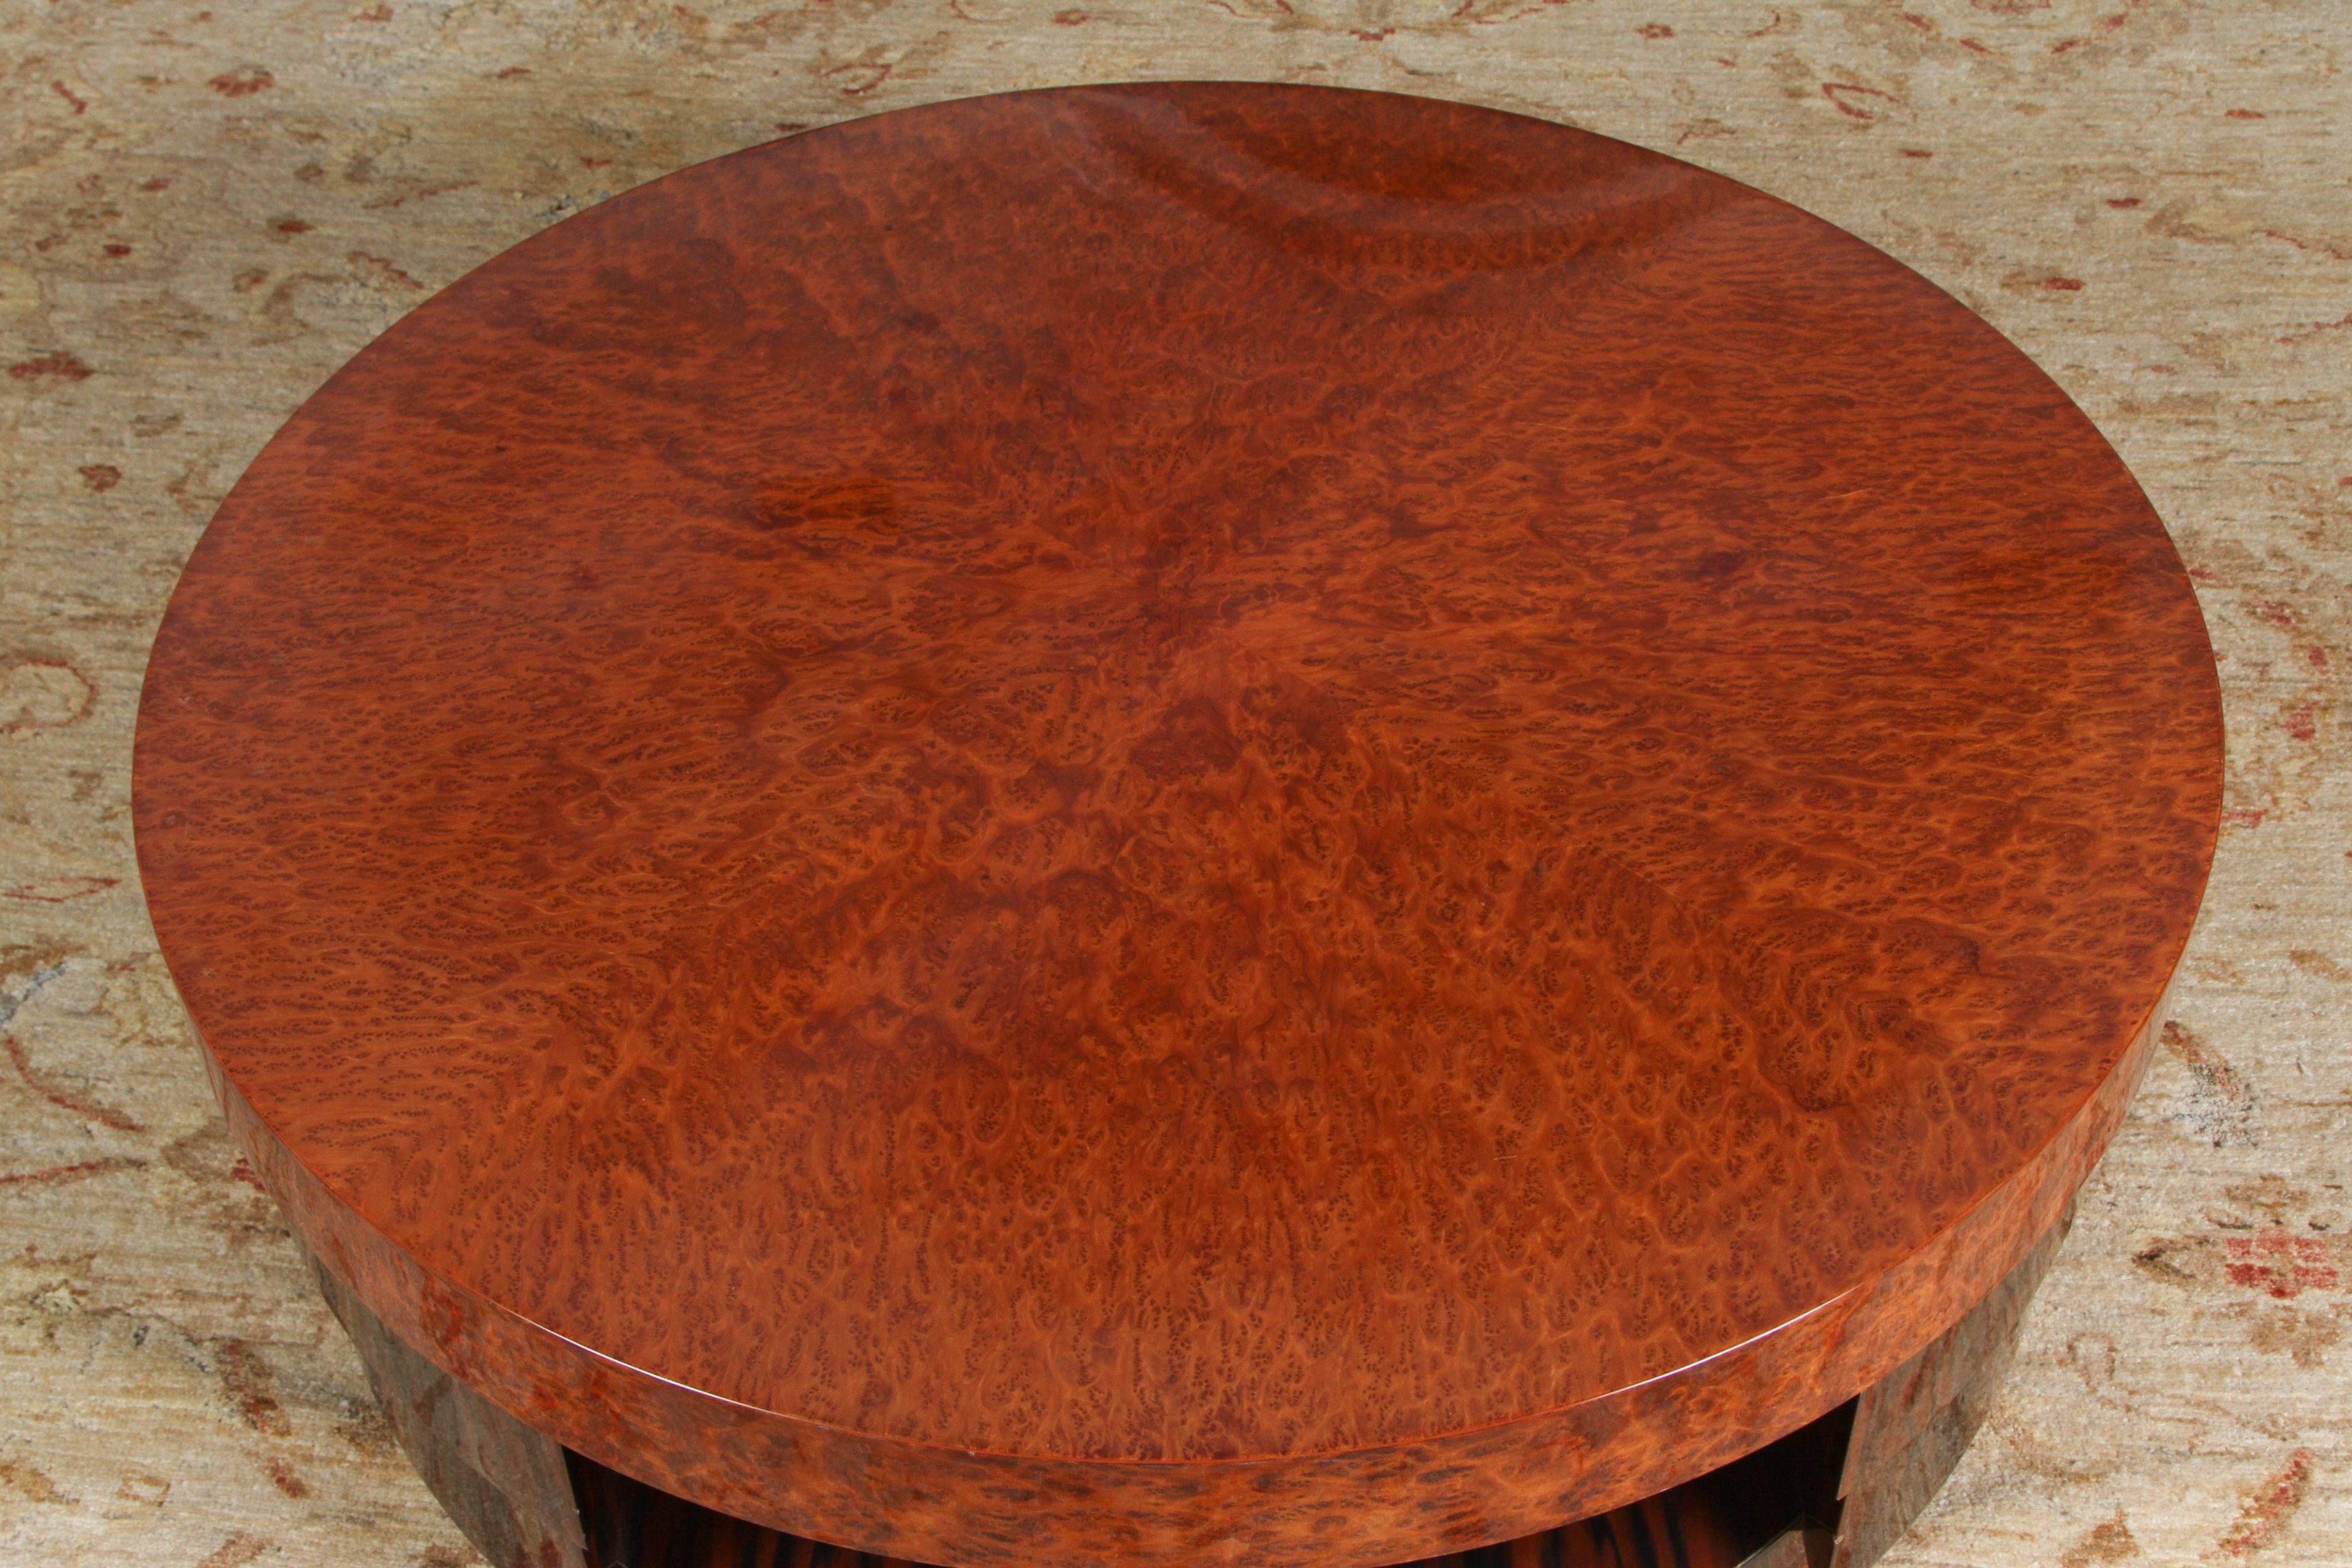 French Modernist Art Deco two-tiered round coffee table in beautiful lacquered two tone walnut burl and exotic wood Macassar like veneered finish.
High gloss lacquer finish which brings out the beautiful detail of the veneer.
A fine example of the